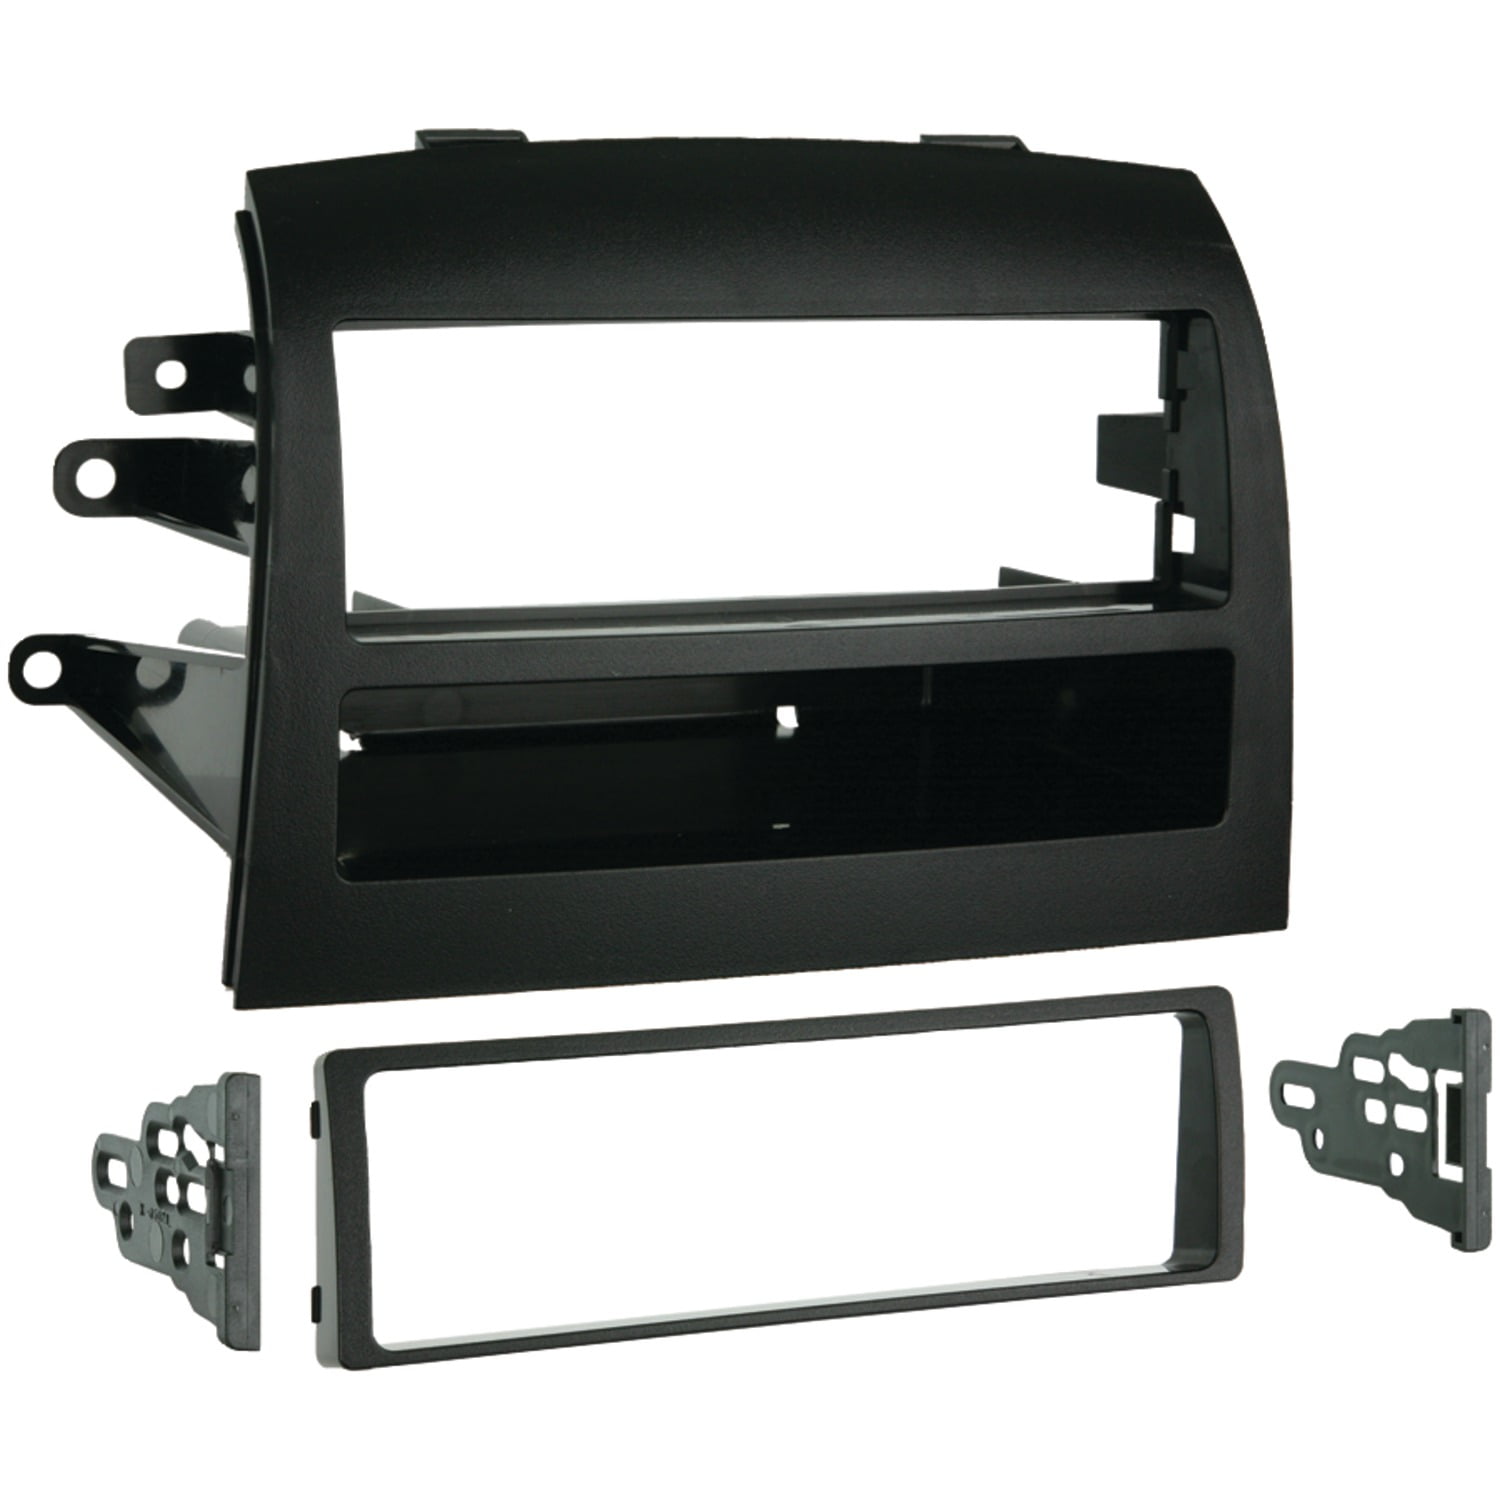 Metra 99-8229S Single Or Double Din Installation Dash Kit For 2011 Toyota Sienna 